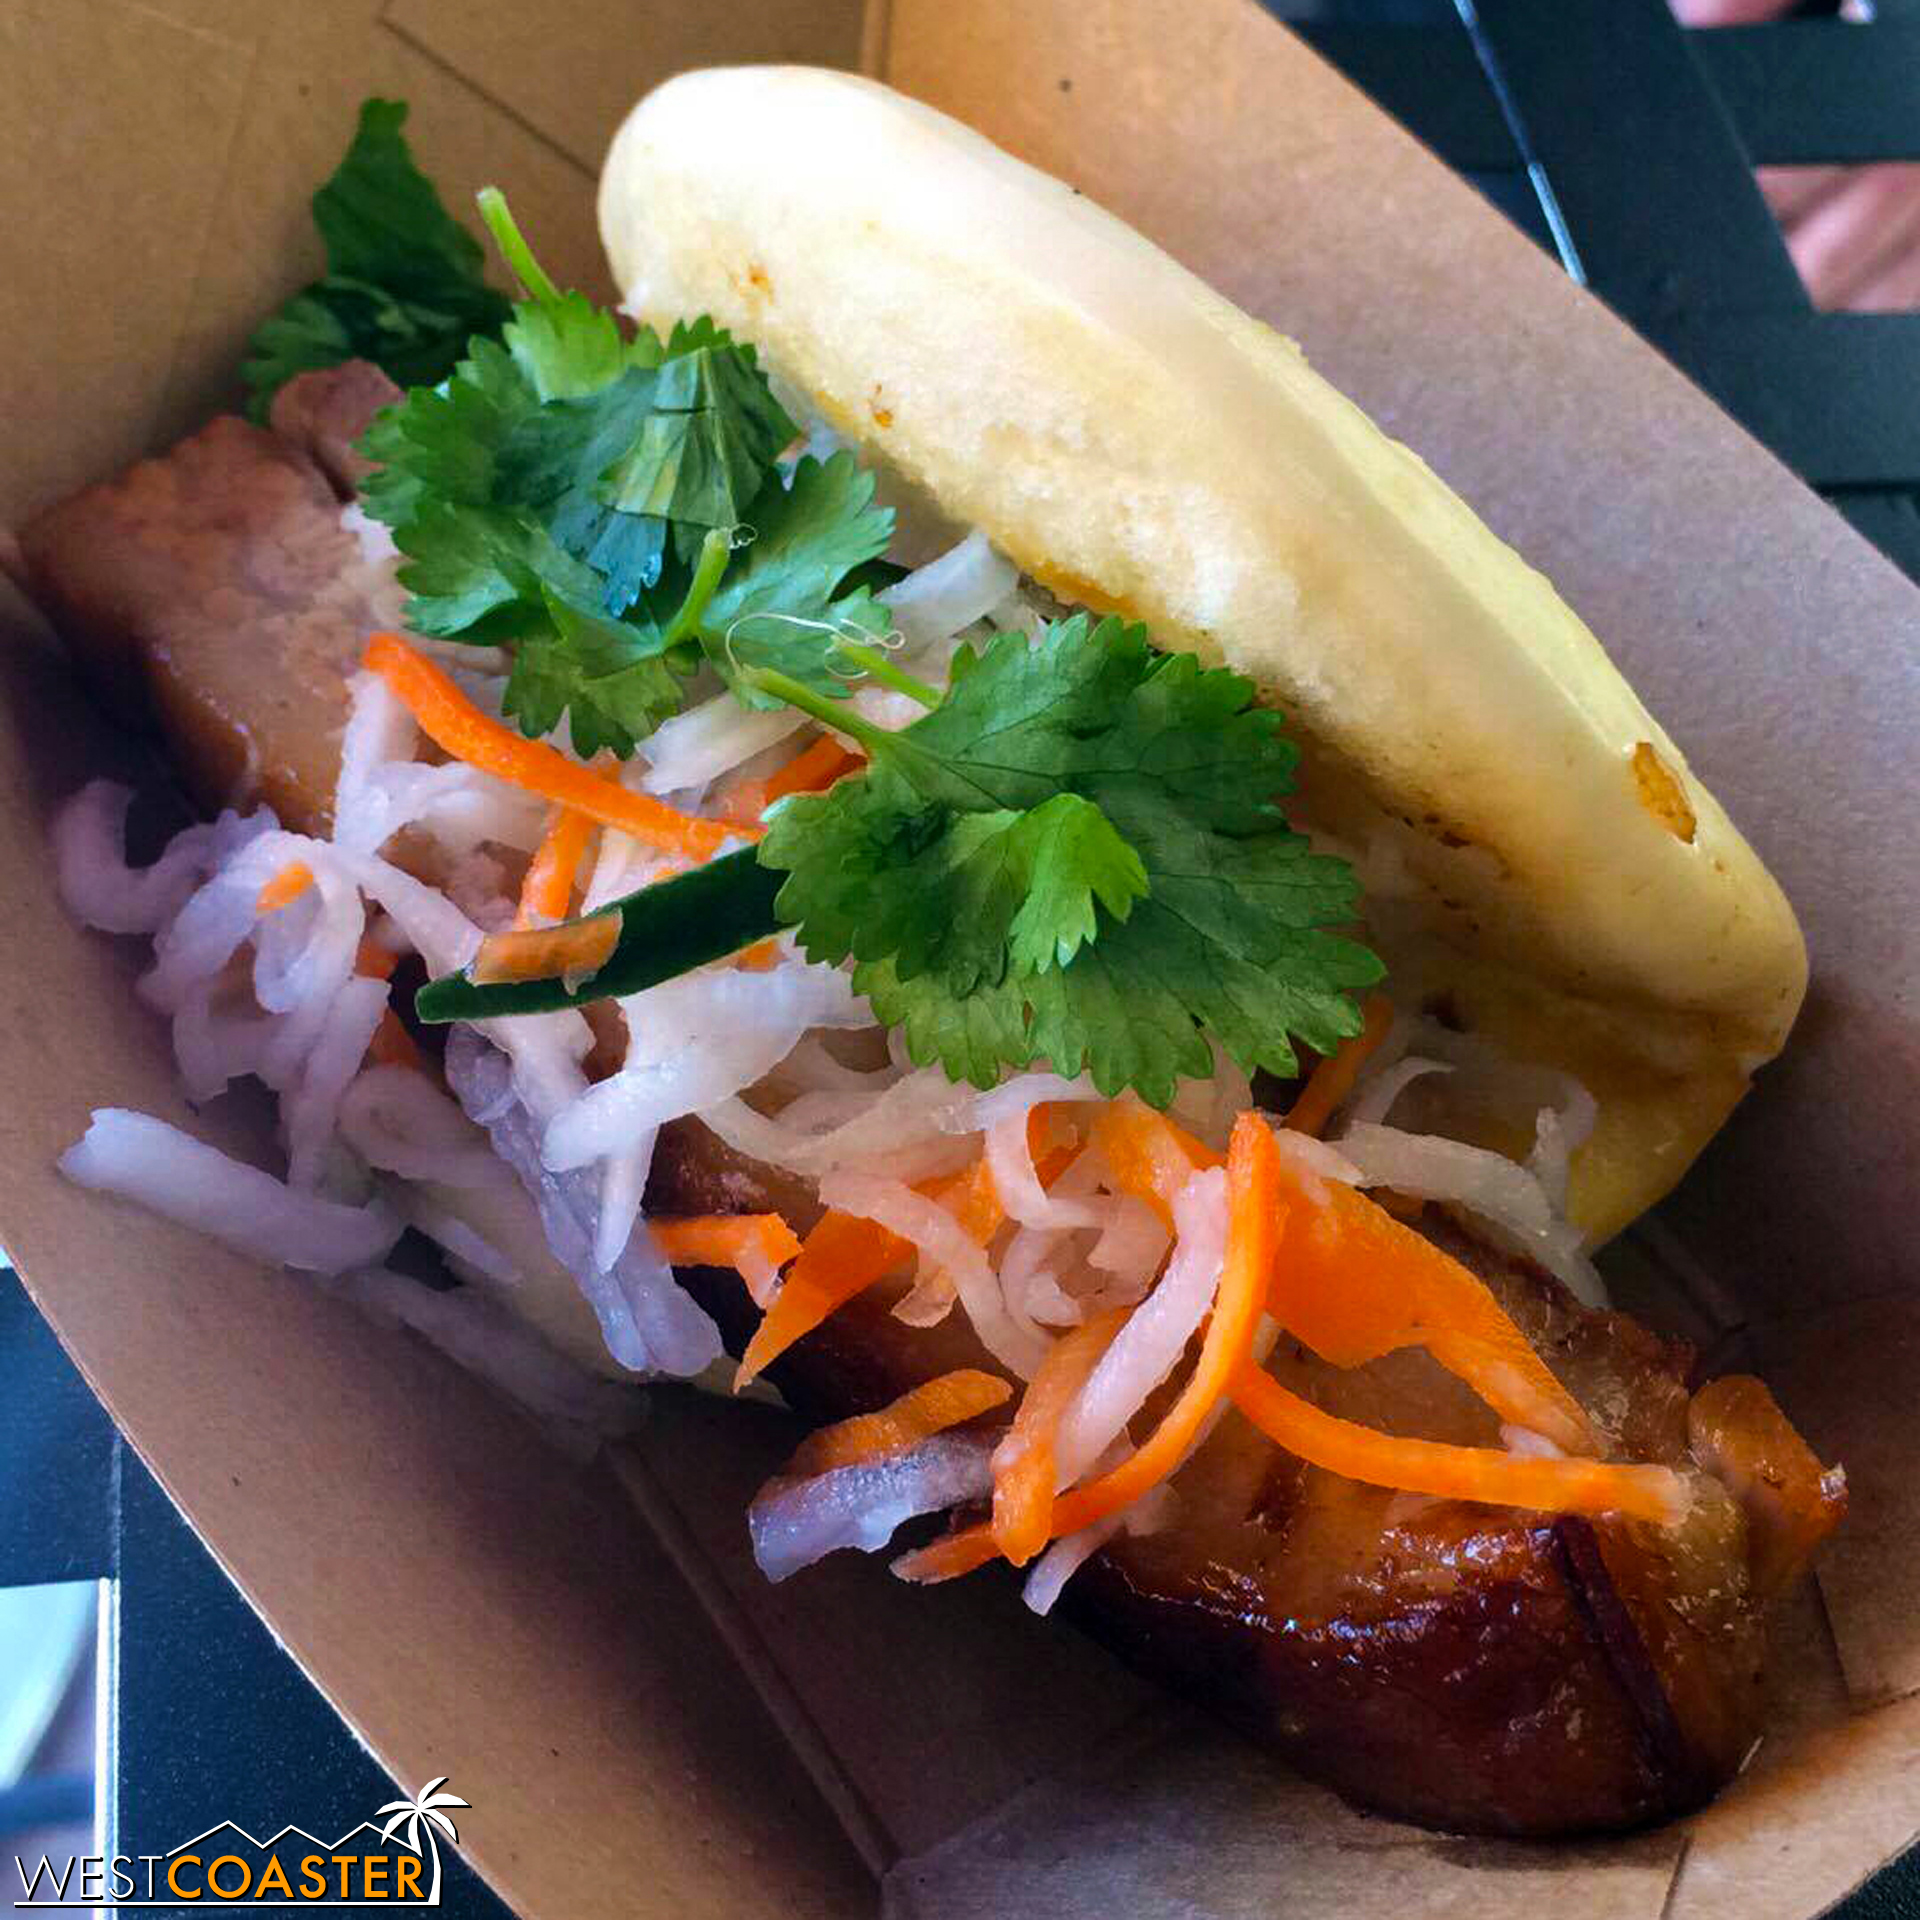  From Garlic Kissed:  Black Garlic and Soy-braised Pork Belly Bao  with Pickled Vegetables ($7.00)  (Photo Credit: Jessica S.) 